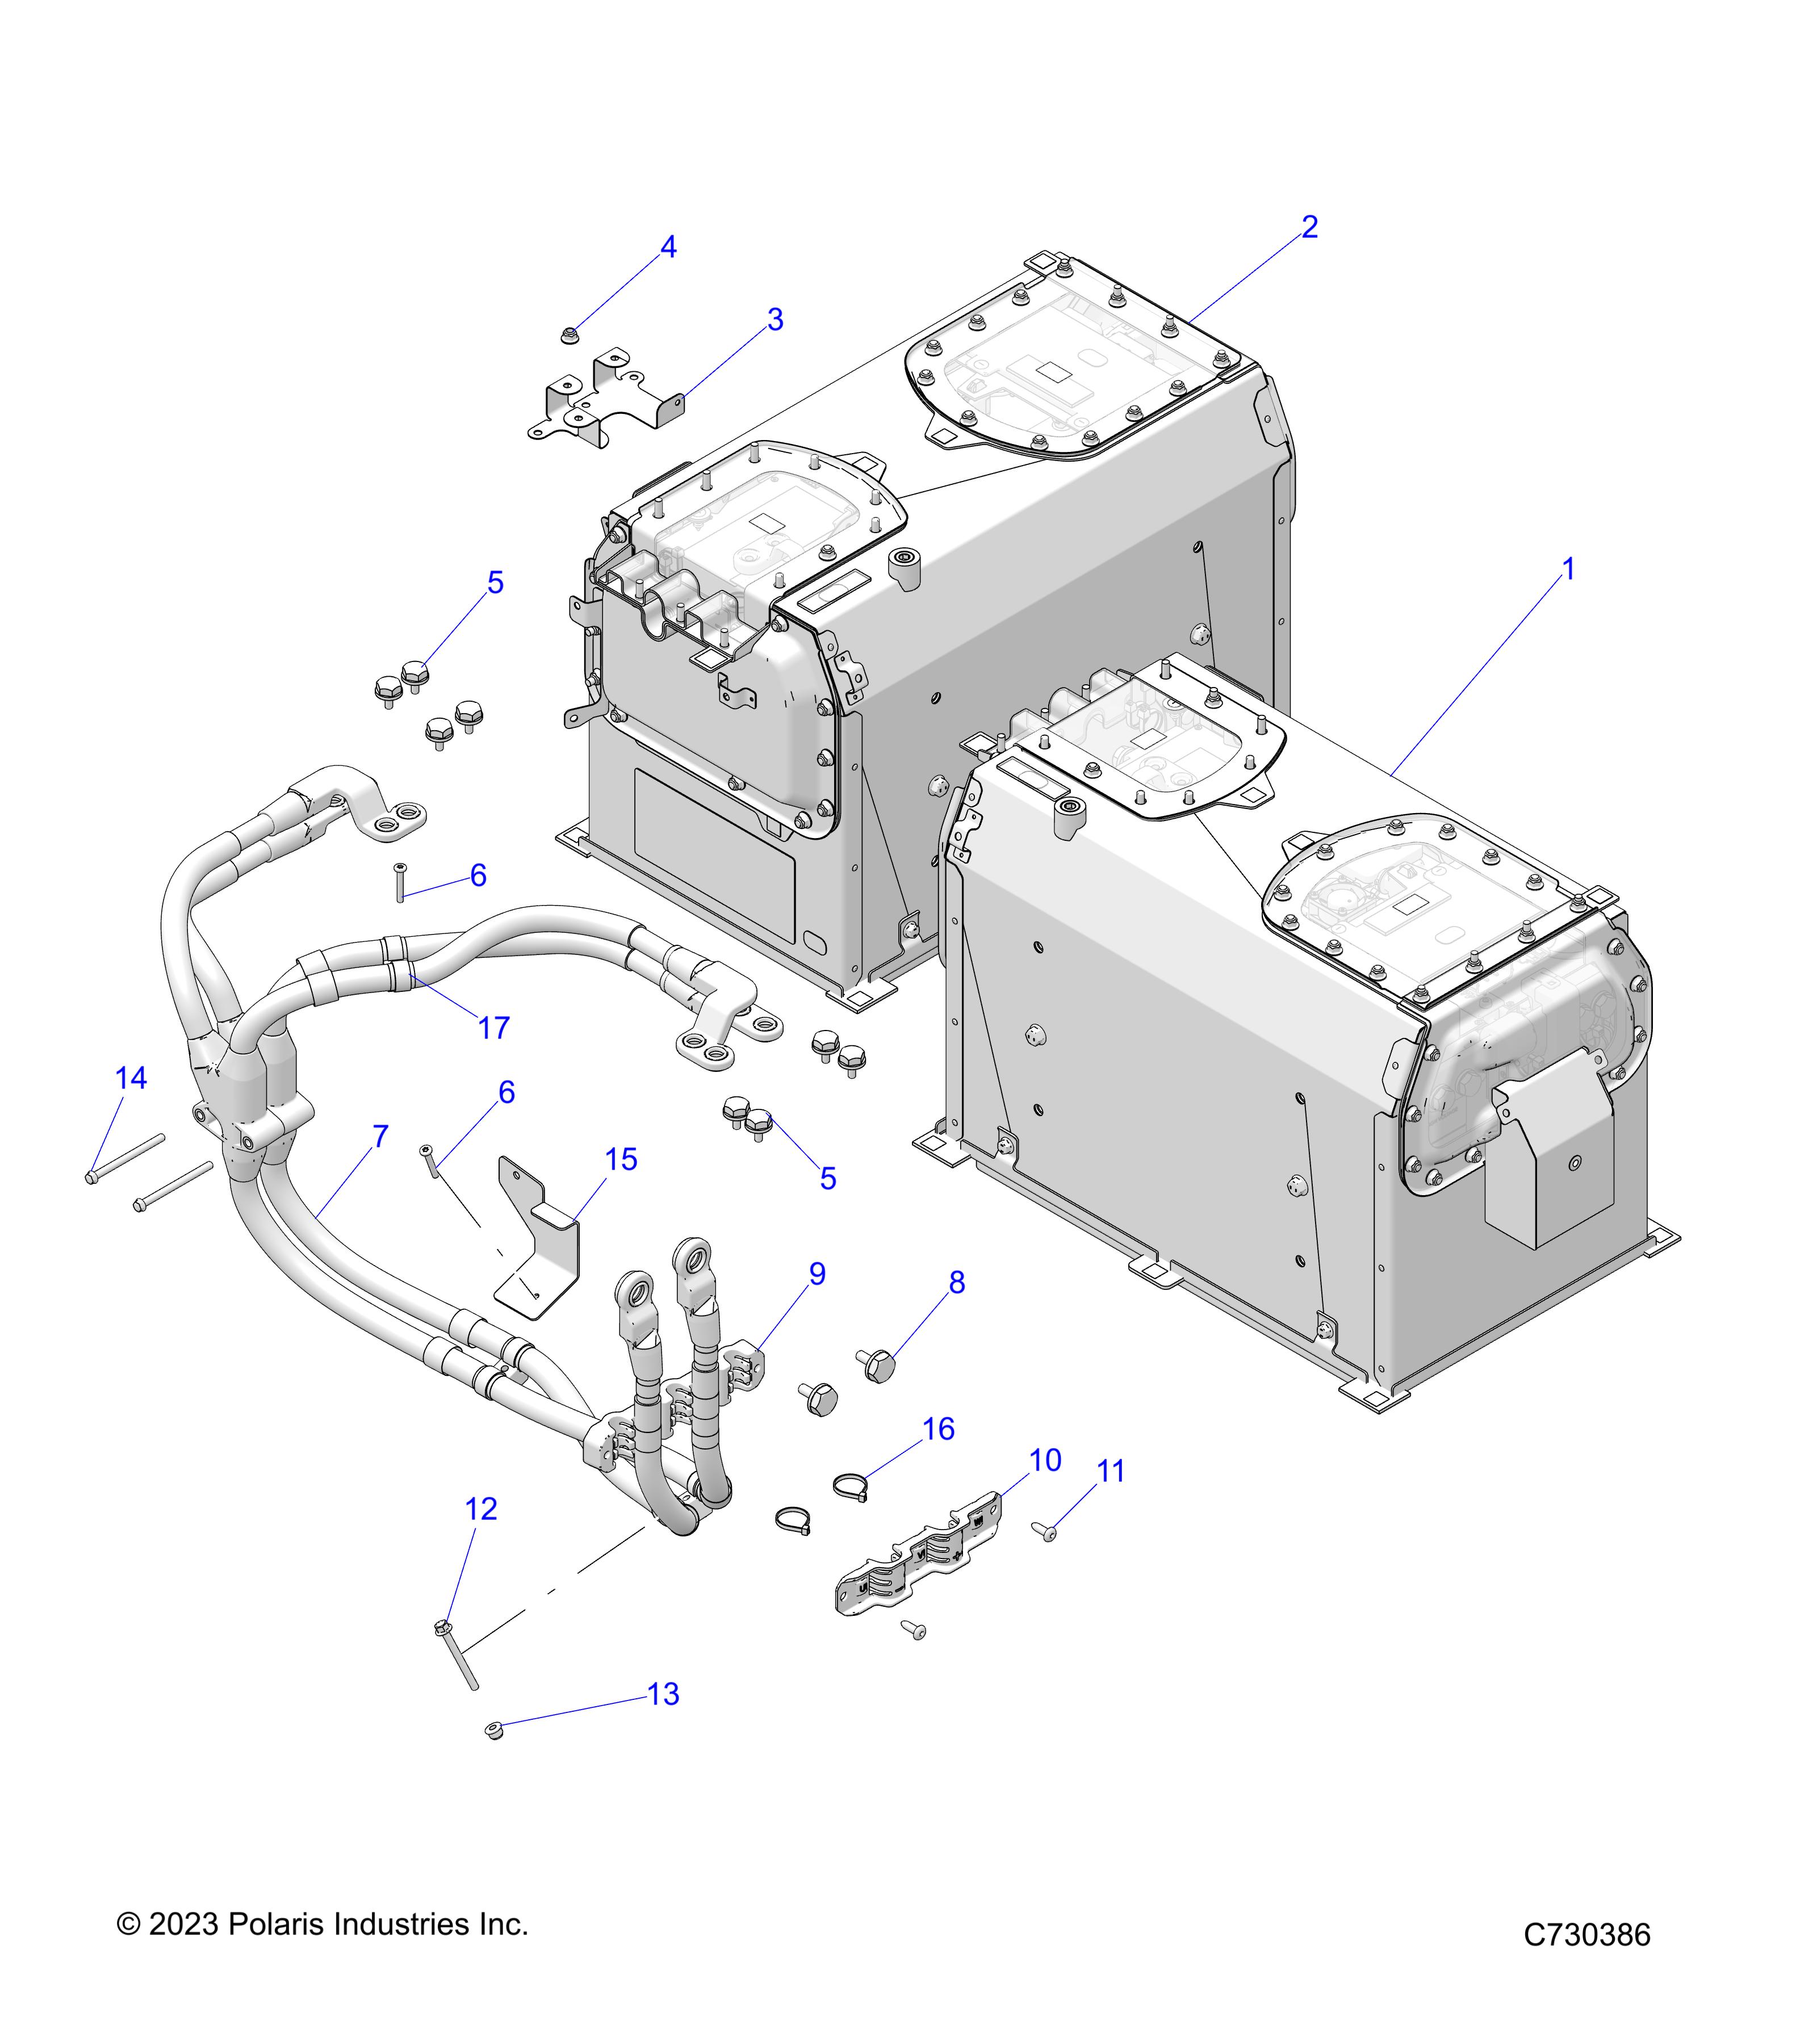 Part Number : 5273870-329 BRKT-HARNESS ROUTING BLK